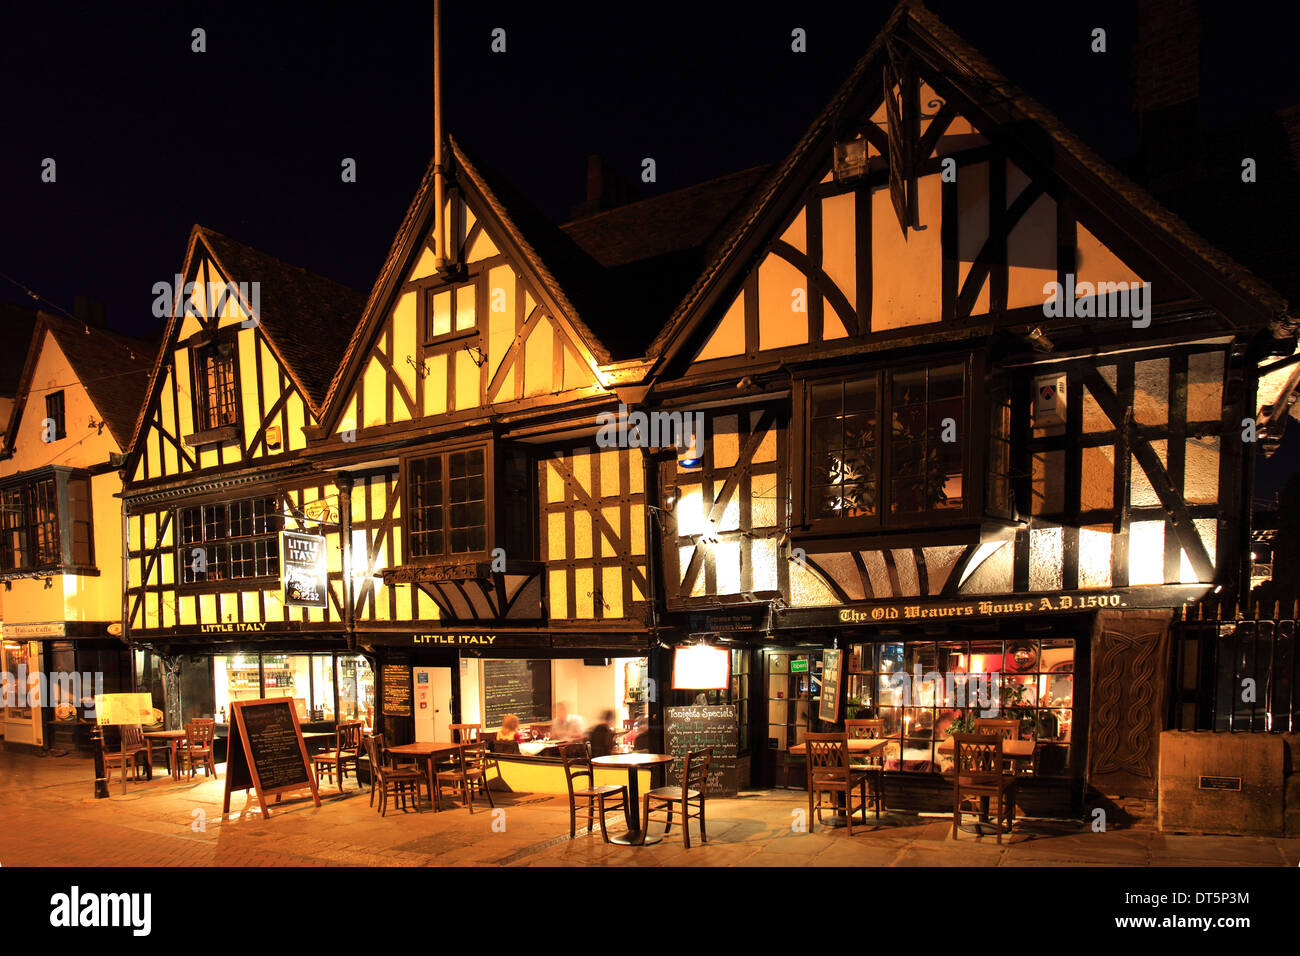 The Old Weavers House at night, Little Italy, Canterbury City, Kent County, England, UK Stock Photo